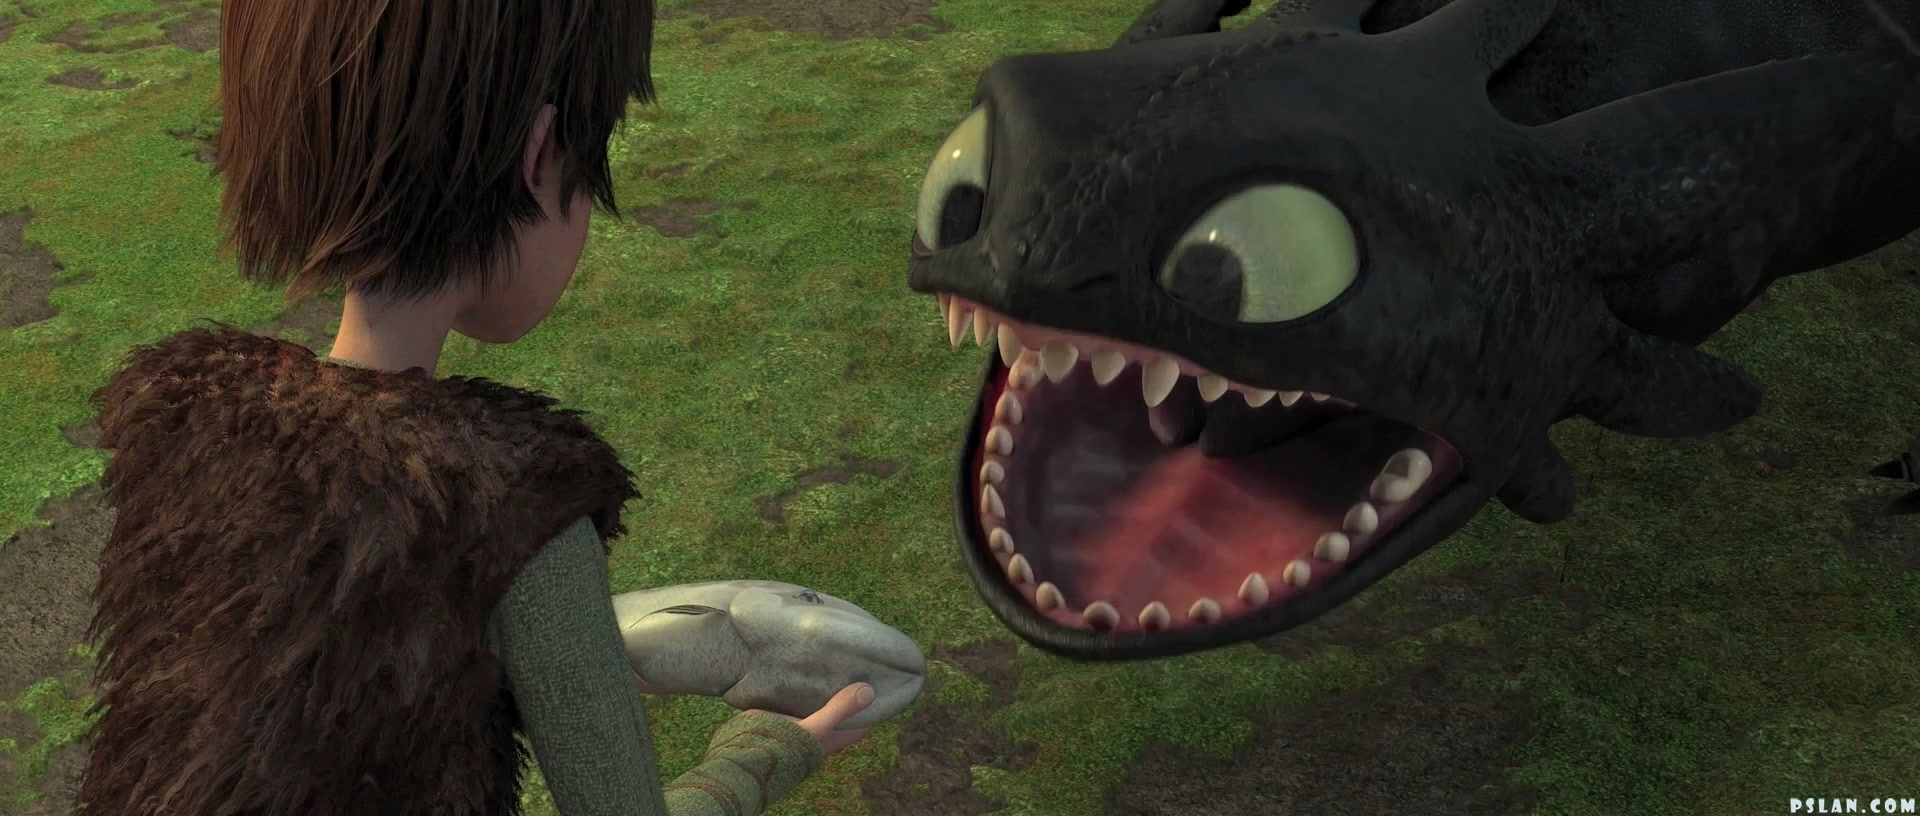 http://angeleve.files.wordpress.com/2010/04/hiccup-toothless-how-to-train-your-dragon-9626254-1920-816.jpg